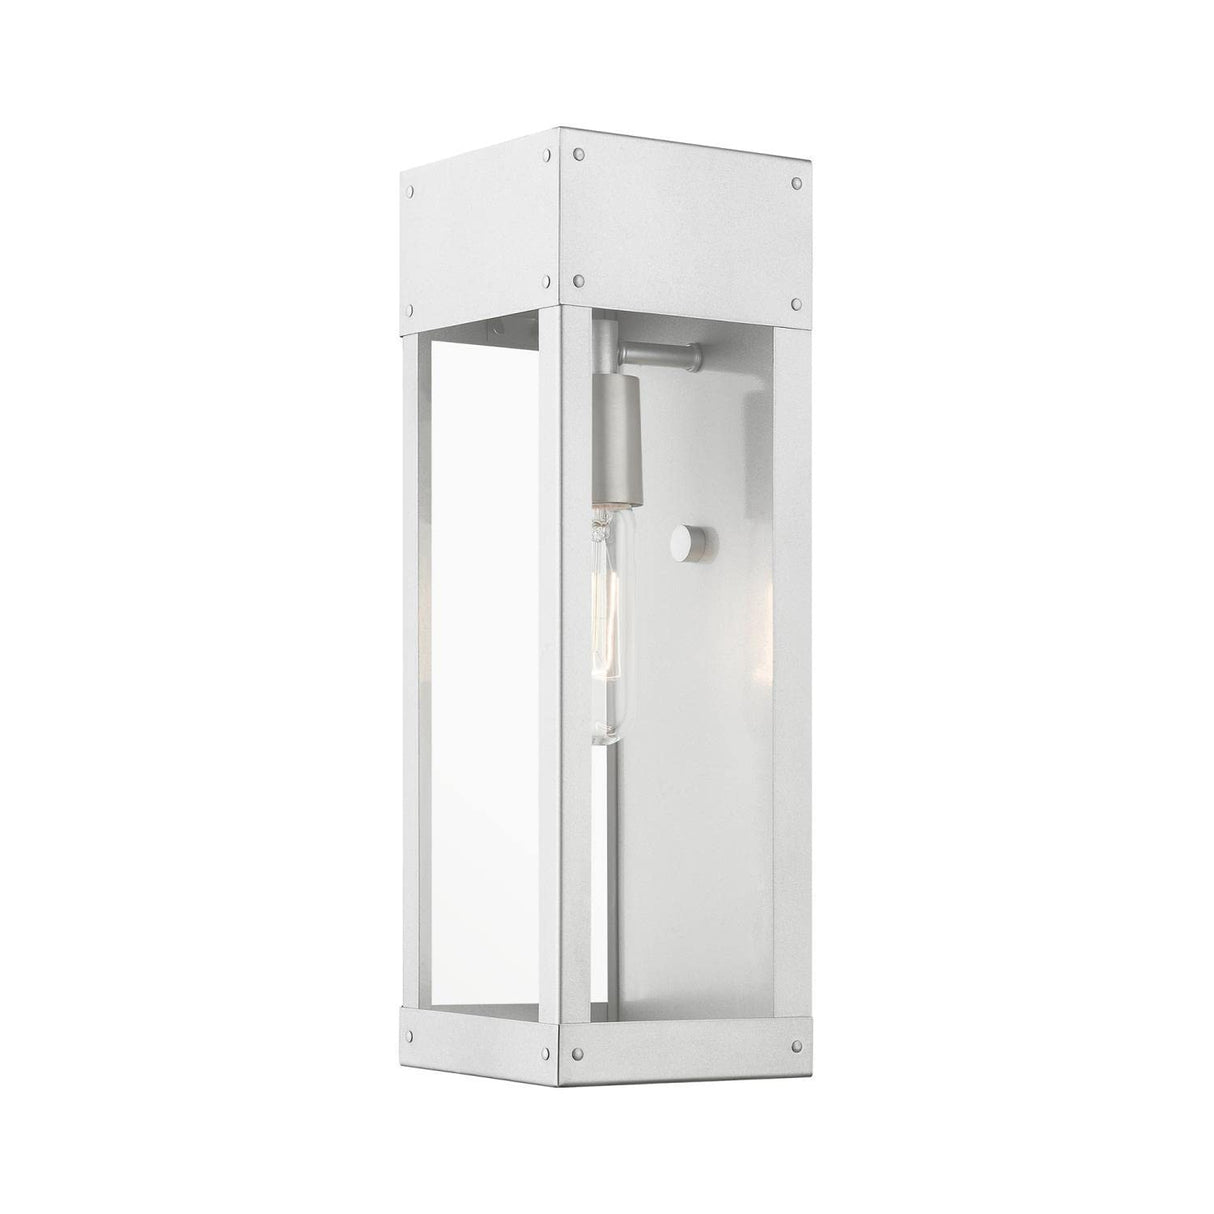 Barrett 1 Light Outdoor Sconce in Satin Nickel with Nickel Candle (20873-81)